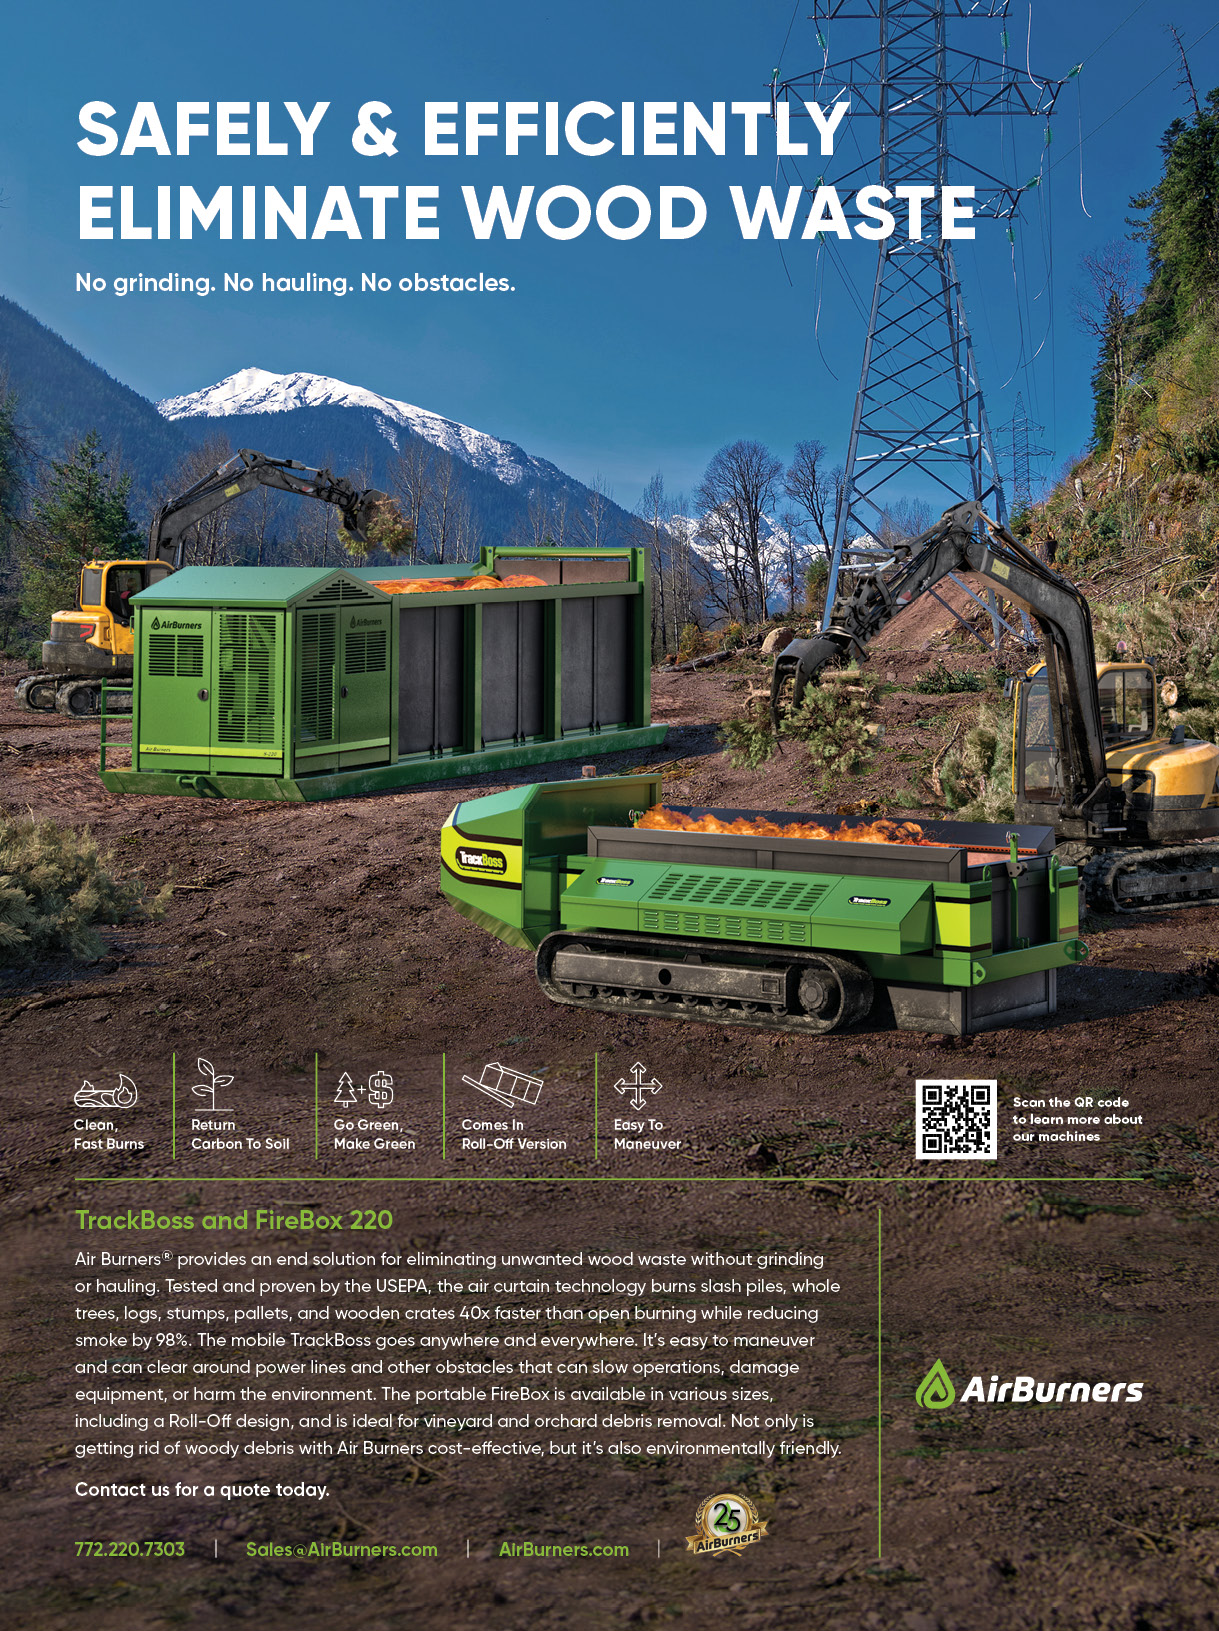 Tree Care Industry Association Editorial Ad